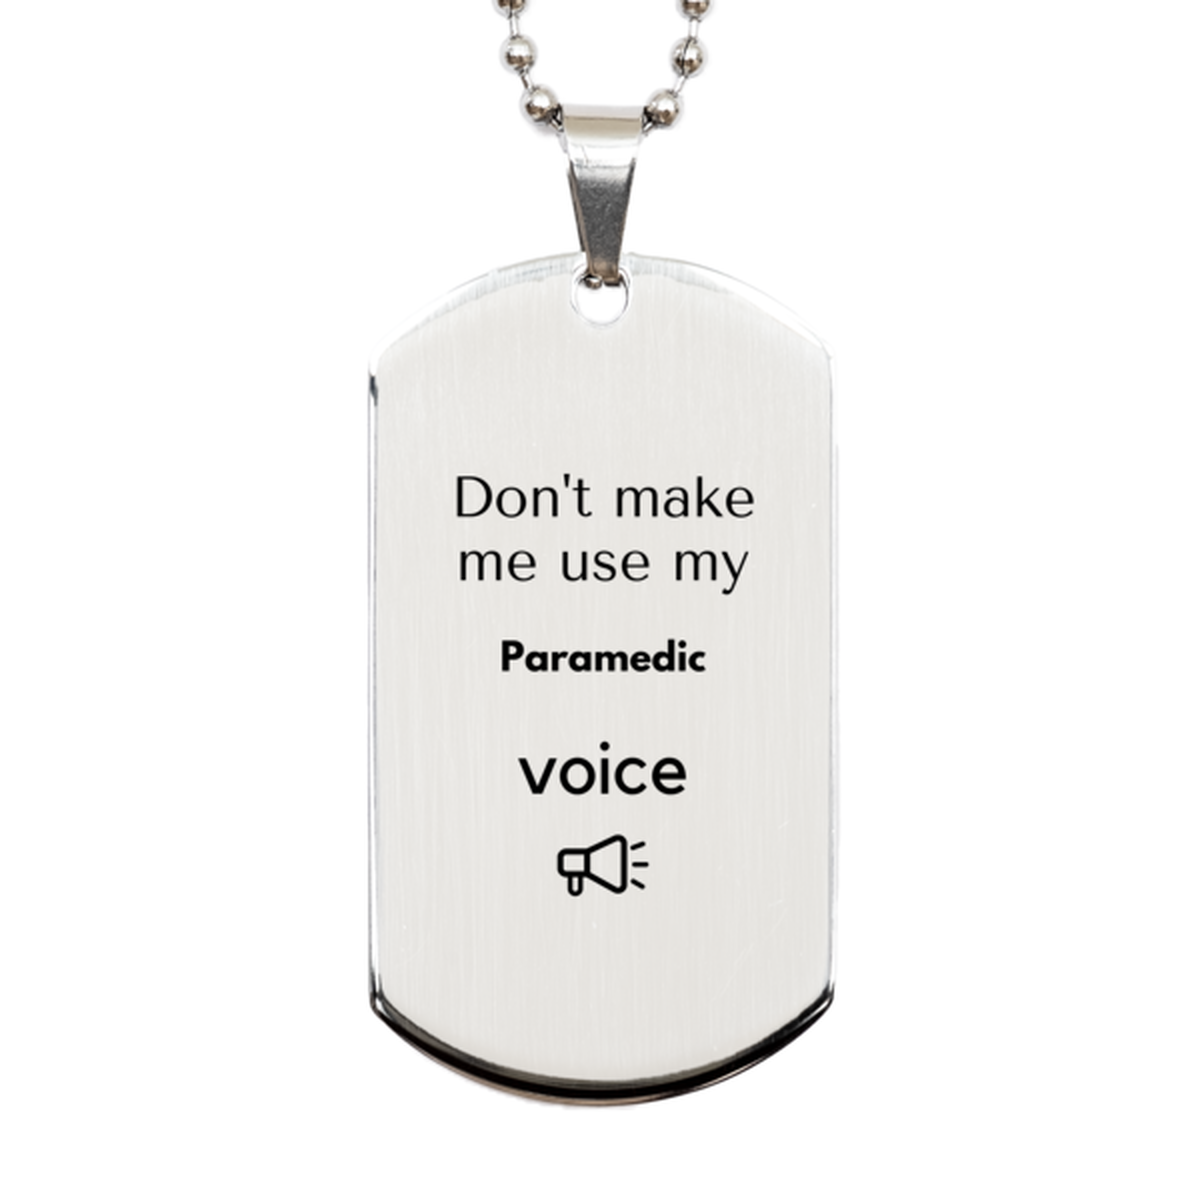 Don't make me use my Paramedic voice, Sarcasm Paramedic Gifts, Christmas Paramedic Silver Dog Tag Birthday Unique Gifts For Paramedic Coworkers, Men, Women, Colleague, Friends